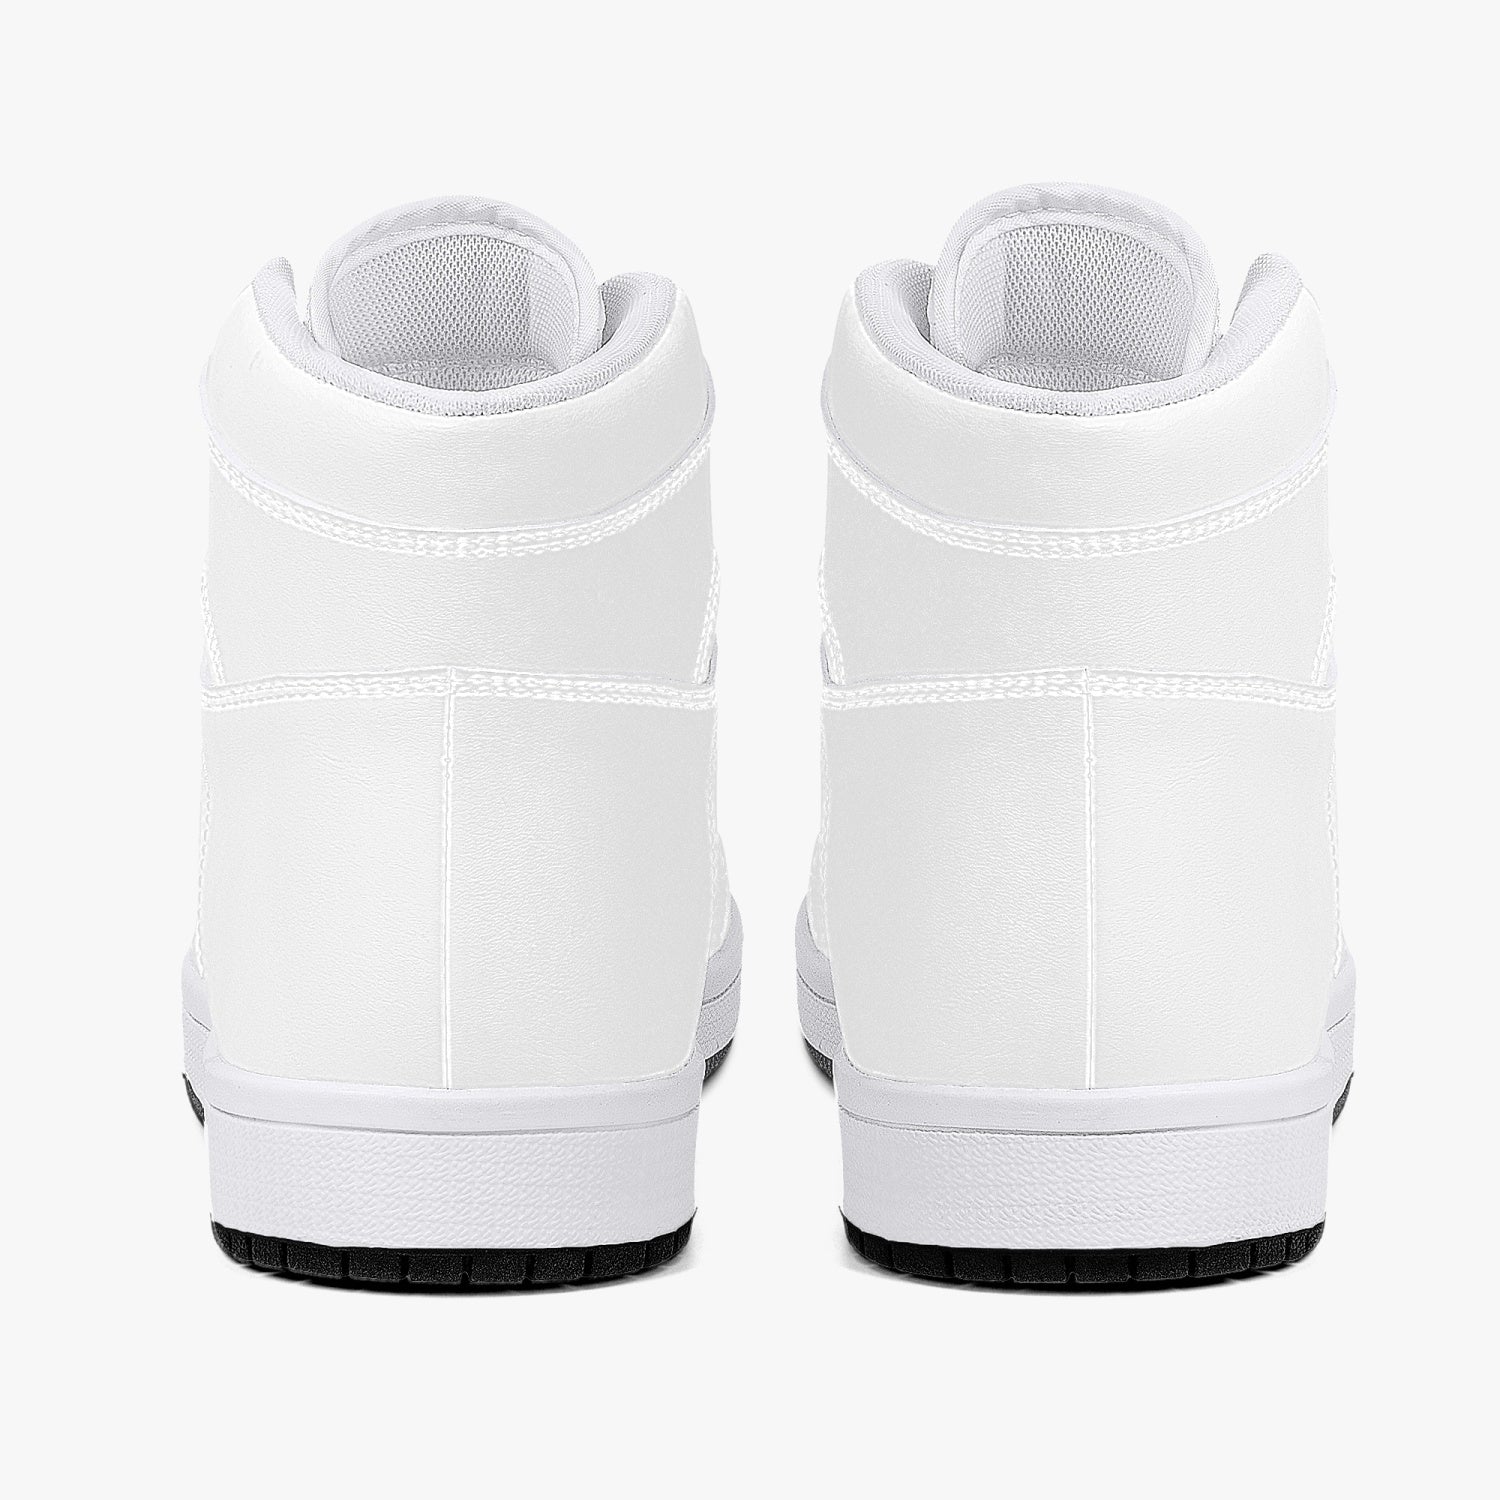 korb High-Top Leather Sneakers - White / Black